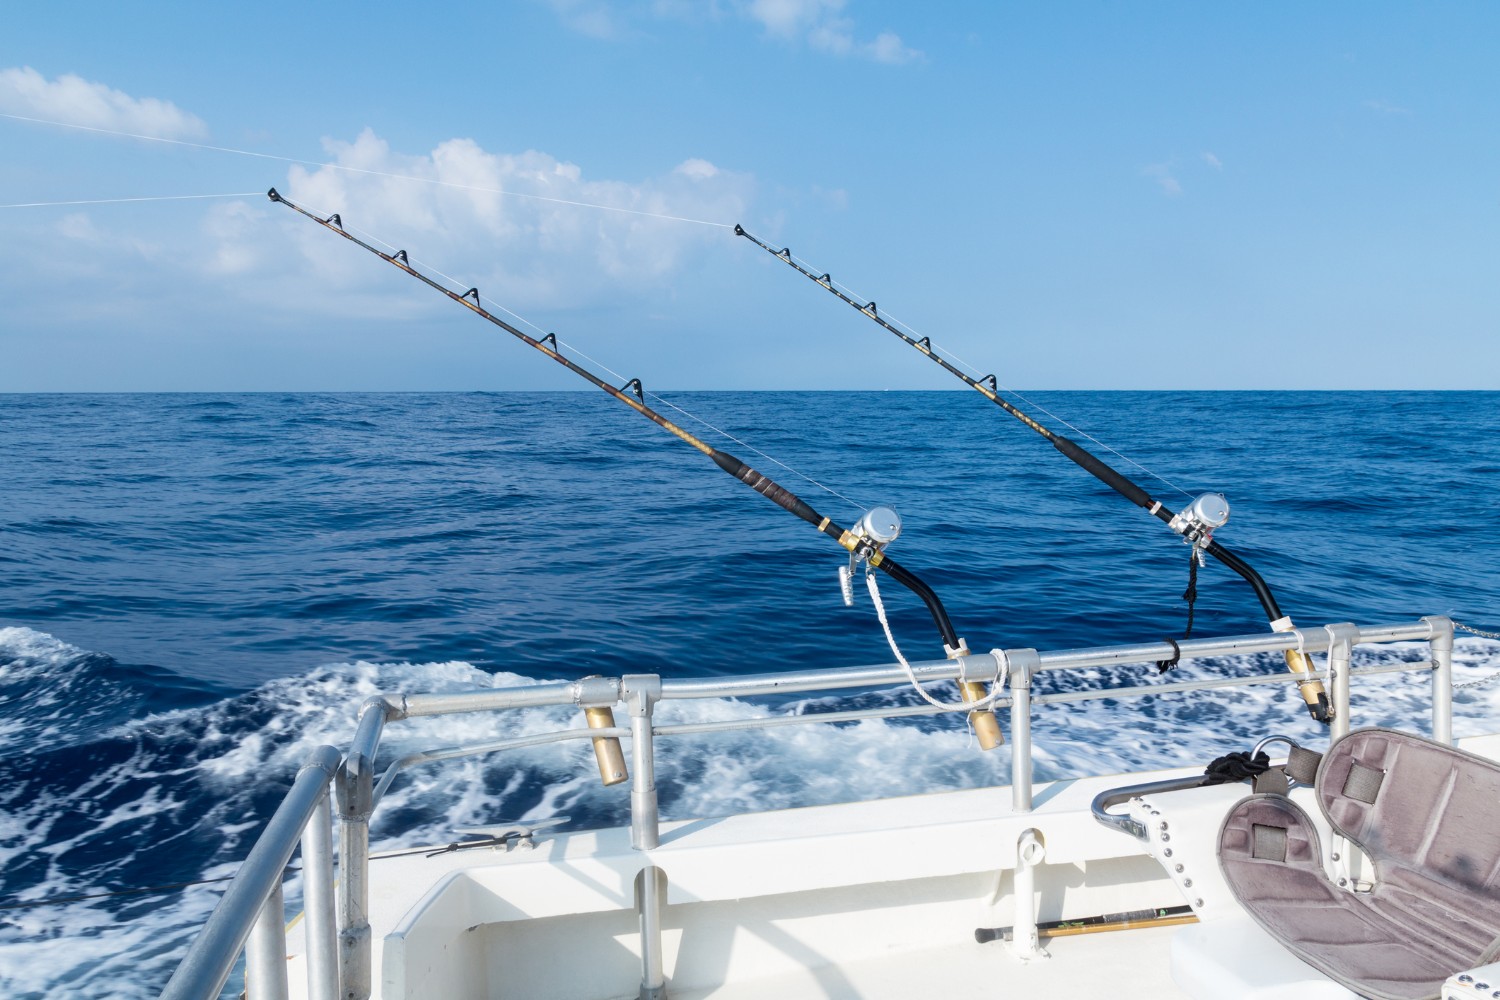 What Are the Best 30A Fishing Charters? | Your Friend at the Beach